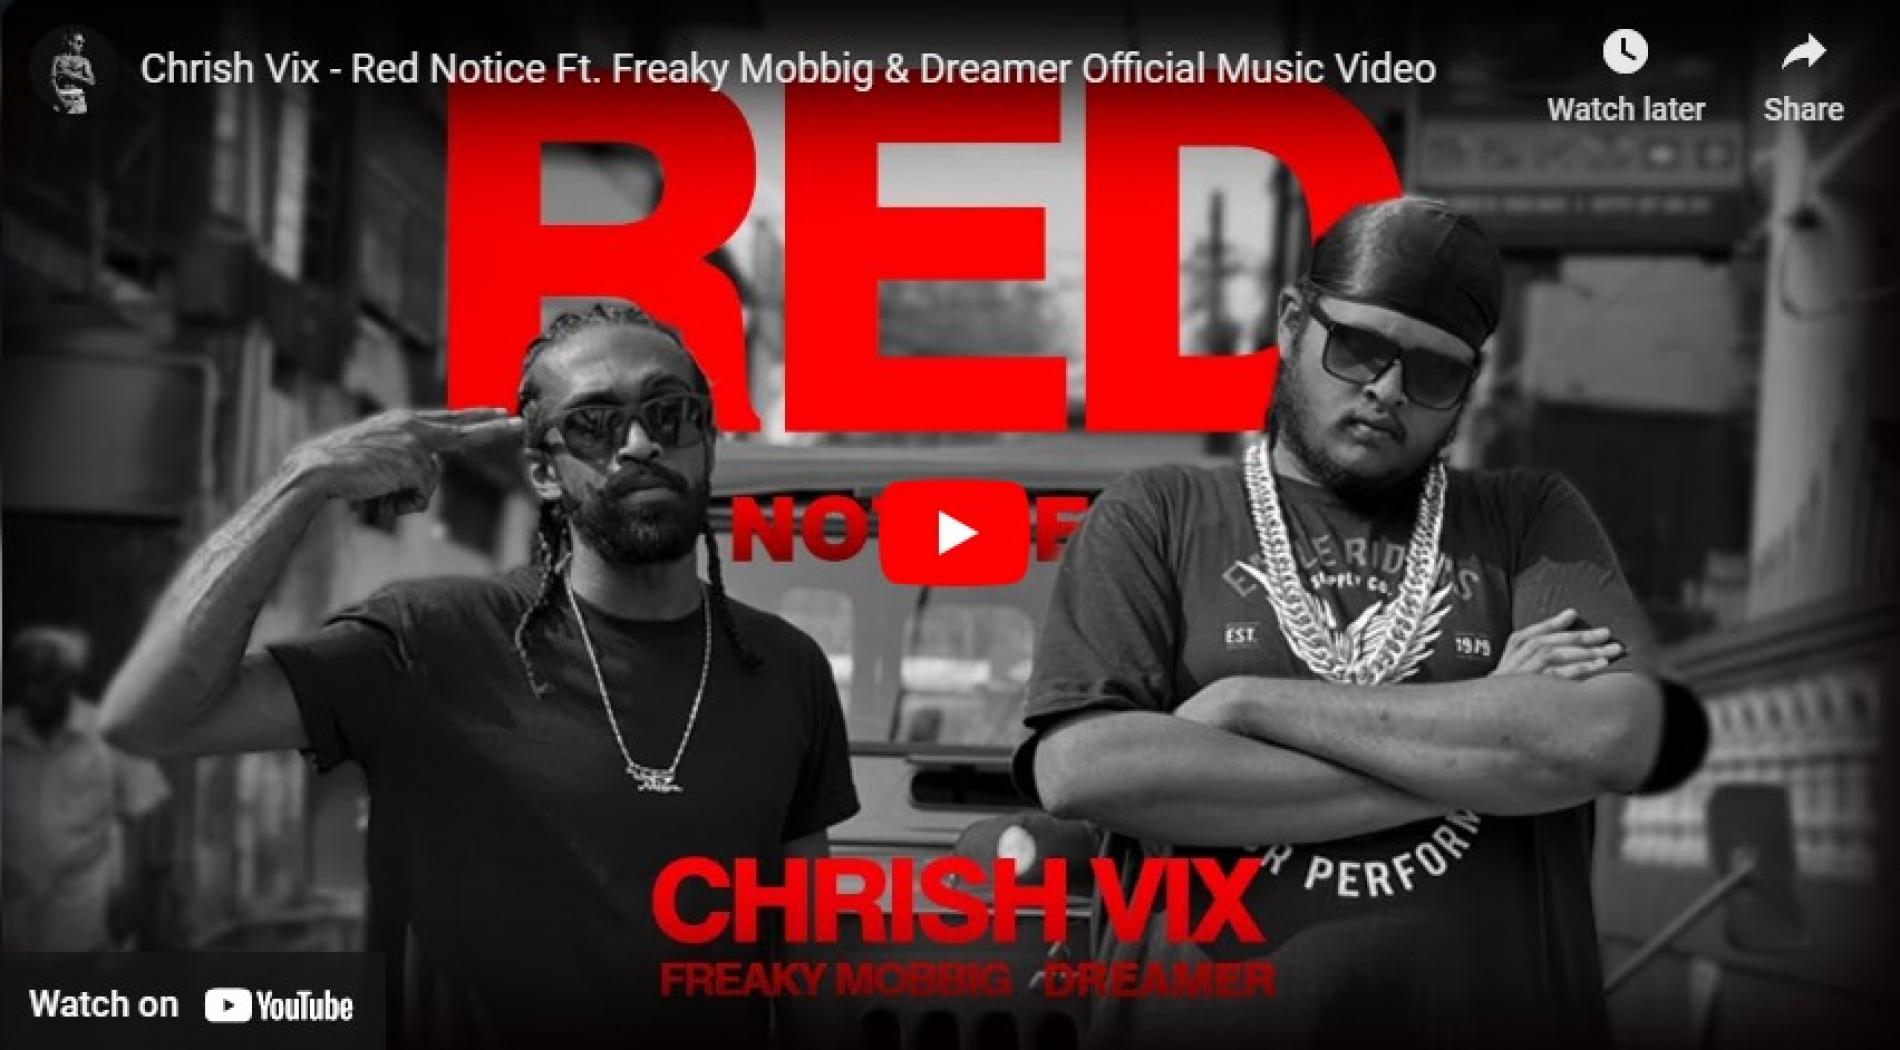 New Music : Chrish Vix – Red Notice Ft. Freaky Mobbig & Dreamer Official Music Video